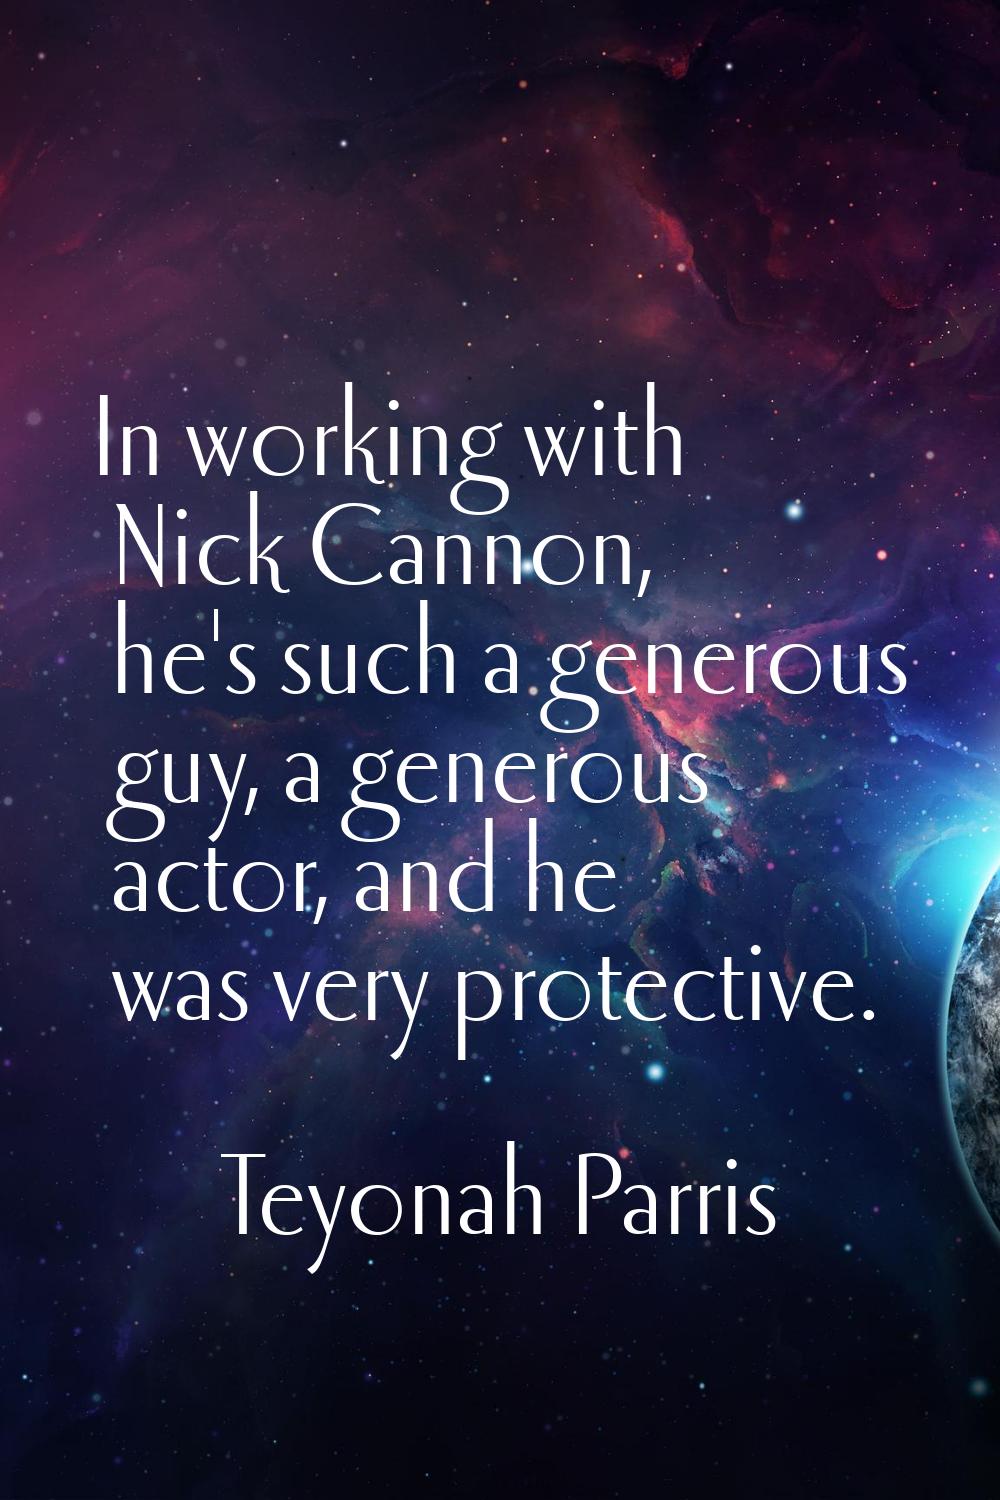 In working with Nick Cannon, he's such a generous guy, a generous actor, and he was very protective